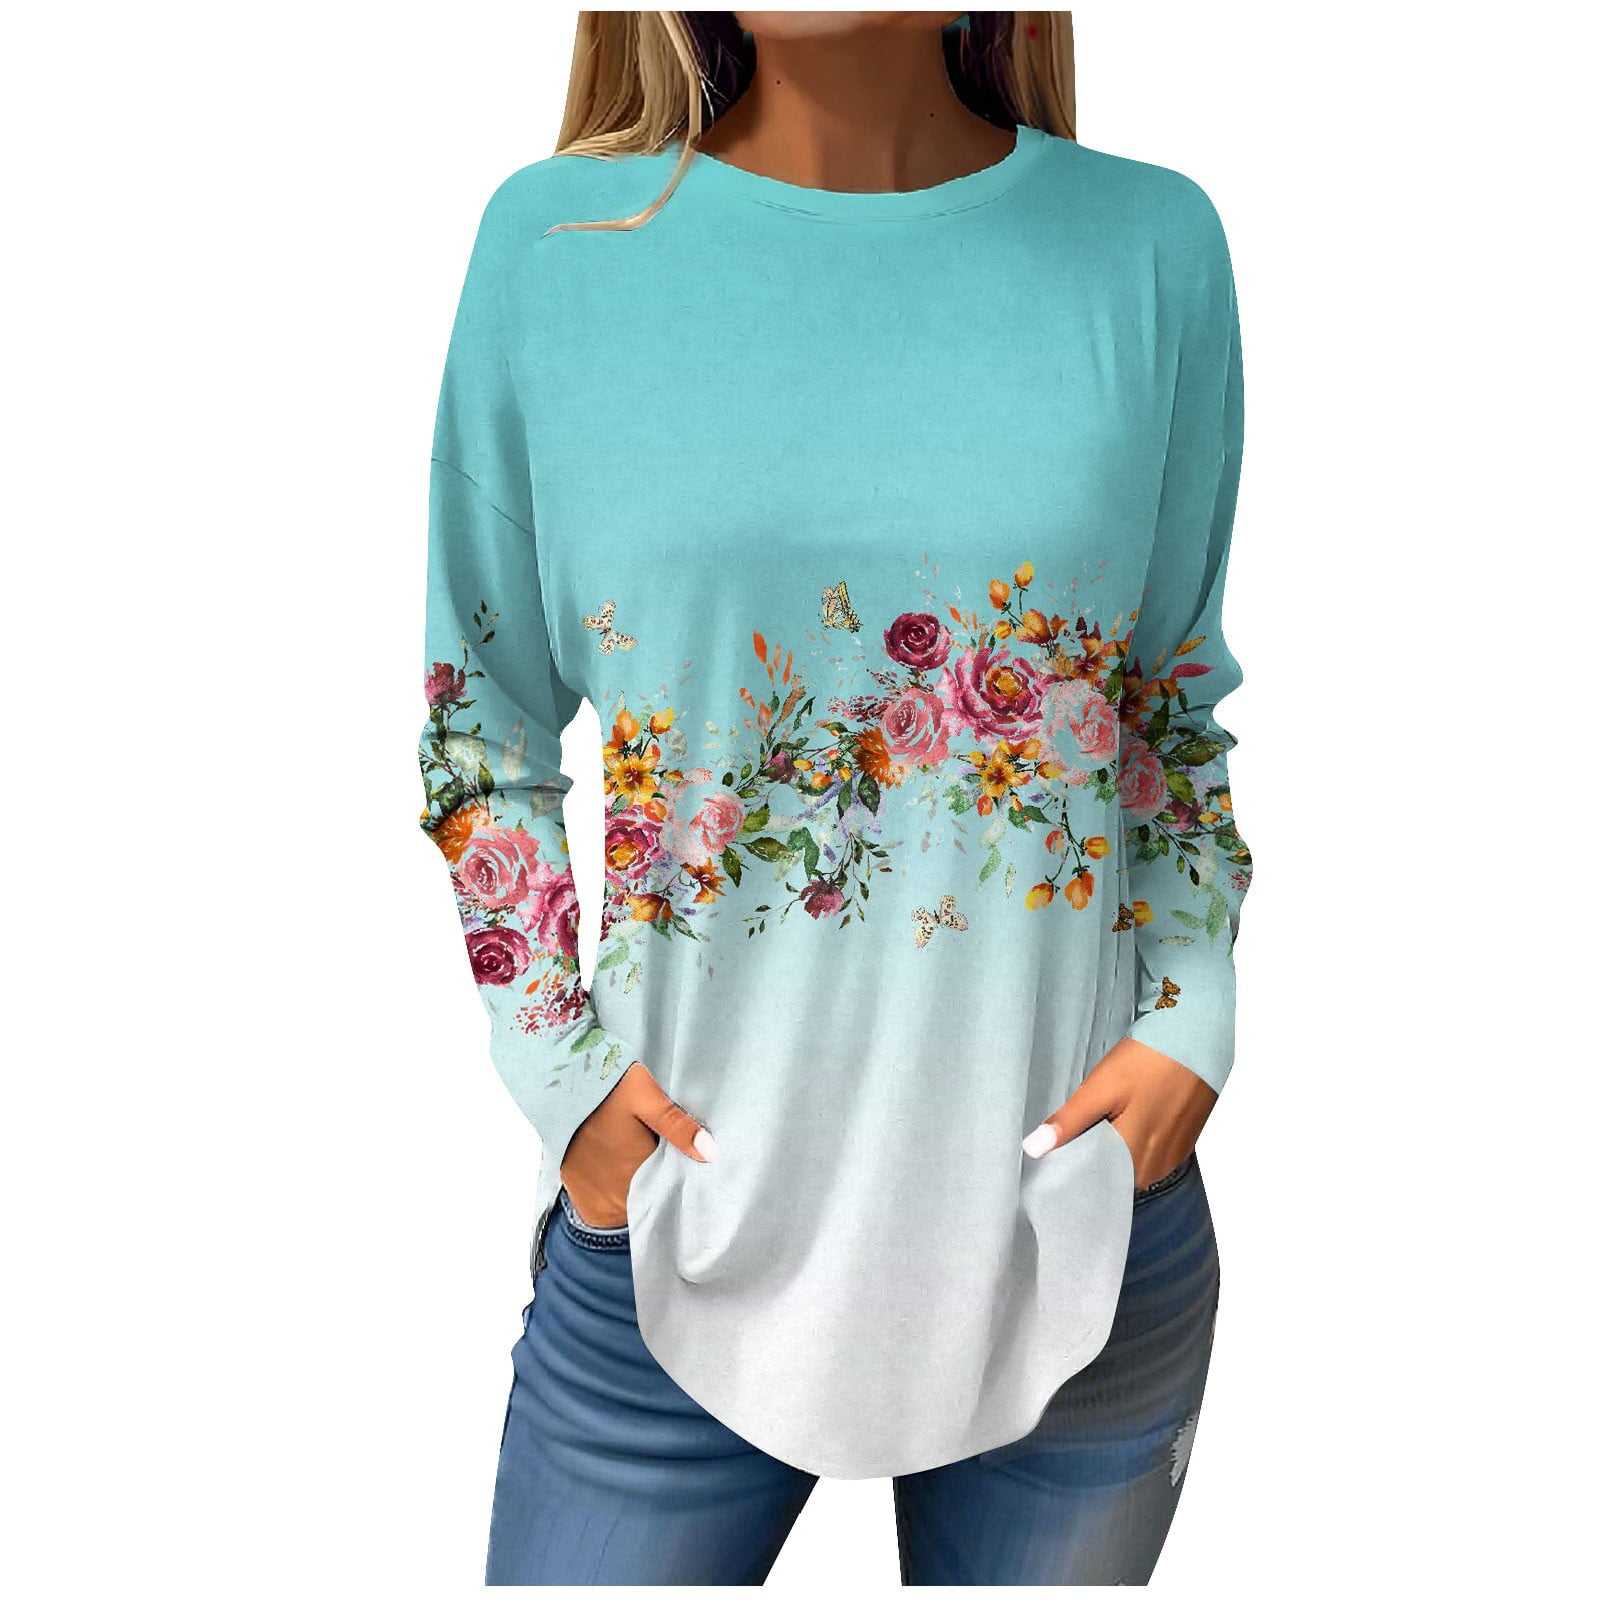 Knosfe Woman Tops Dressy Long Sleeve Floral Color Block Woman Shirts ...